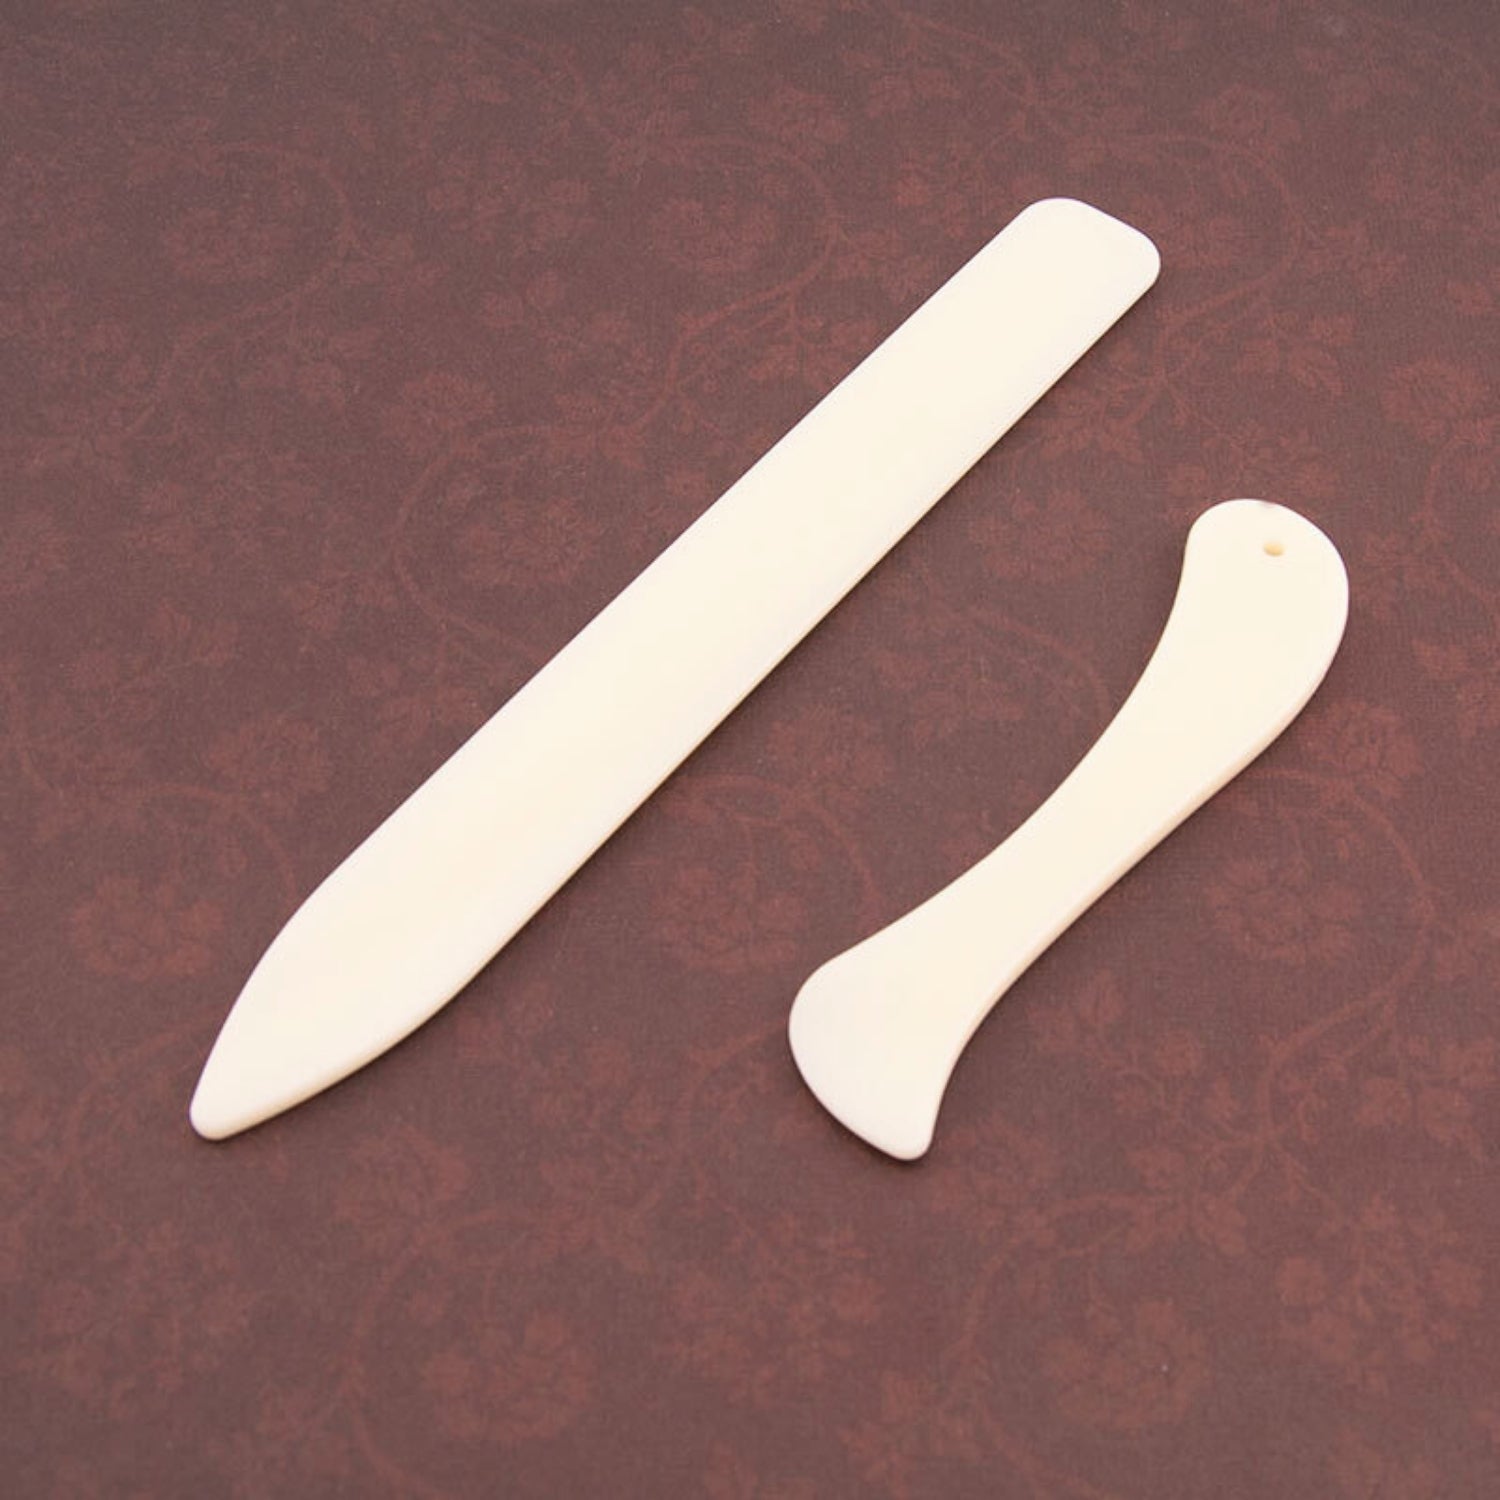 100% Genuine Bone Folders And Crease Tools Origami For Burnishing Tool, Card Making And Folding Paper 5